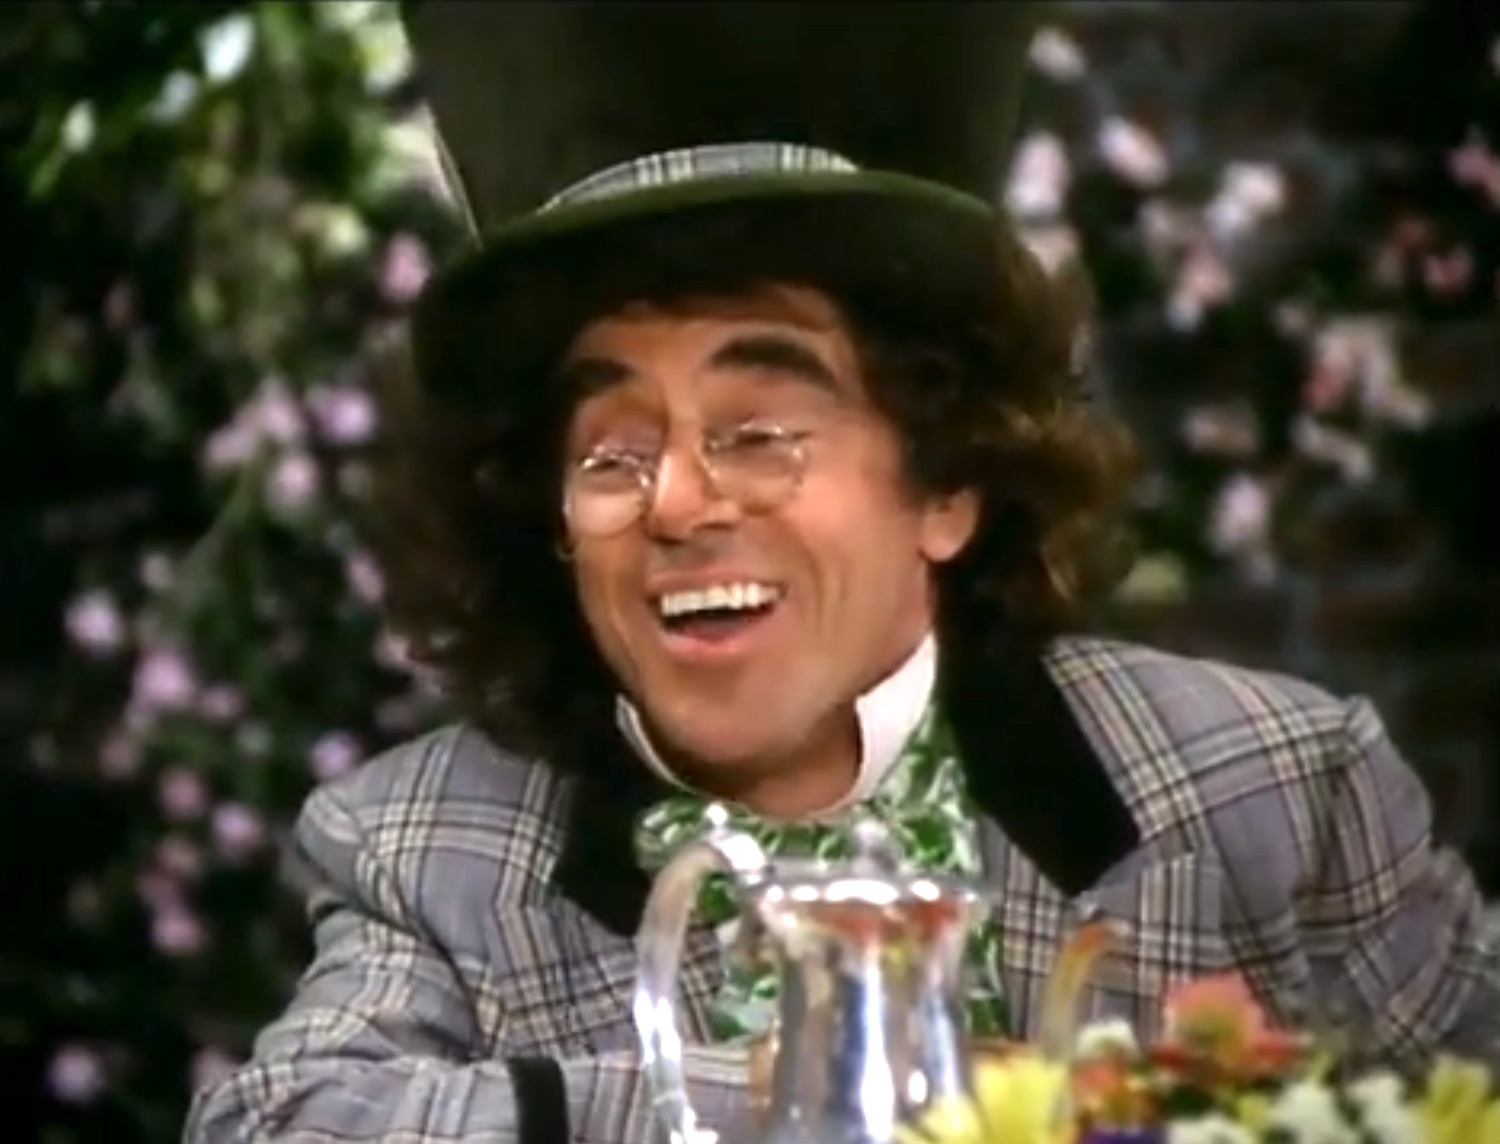 Song lyrics to Laugh, Music and Lyrics by Steve Allen, Performed by Anthony Newley in Alice in Wonderland (1985)